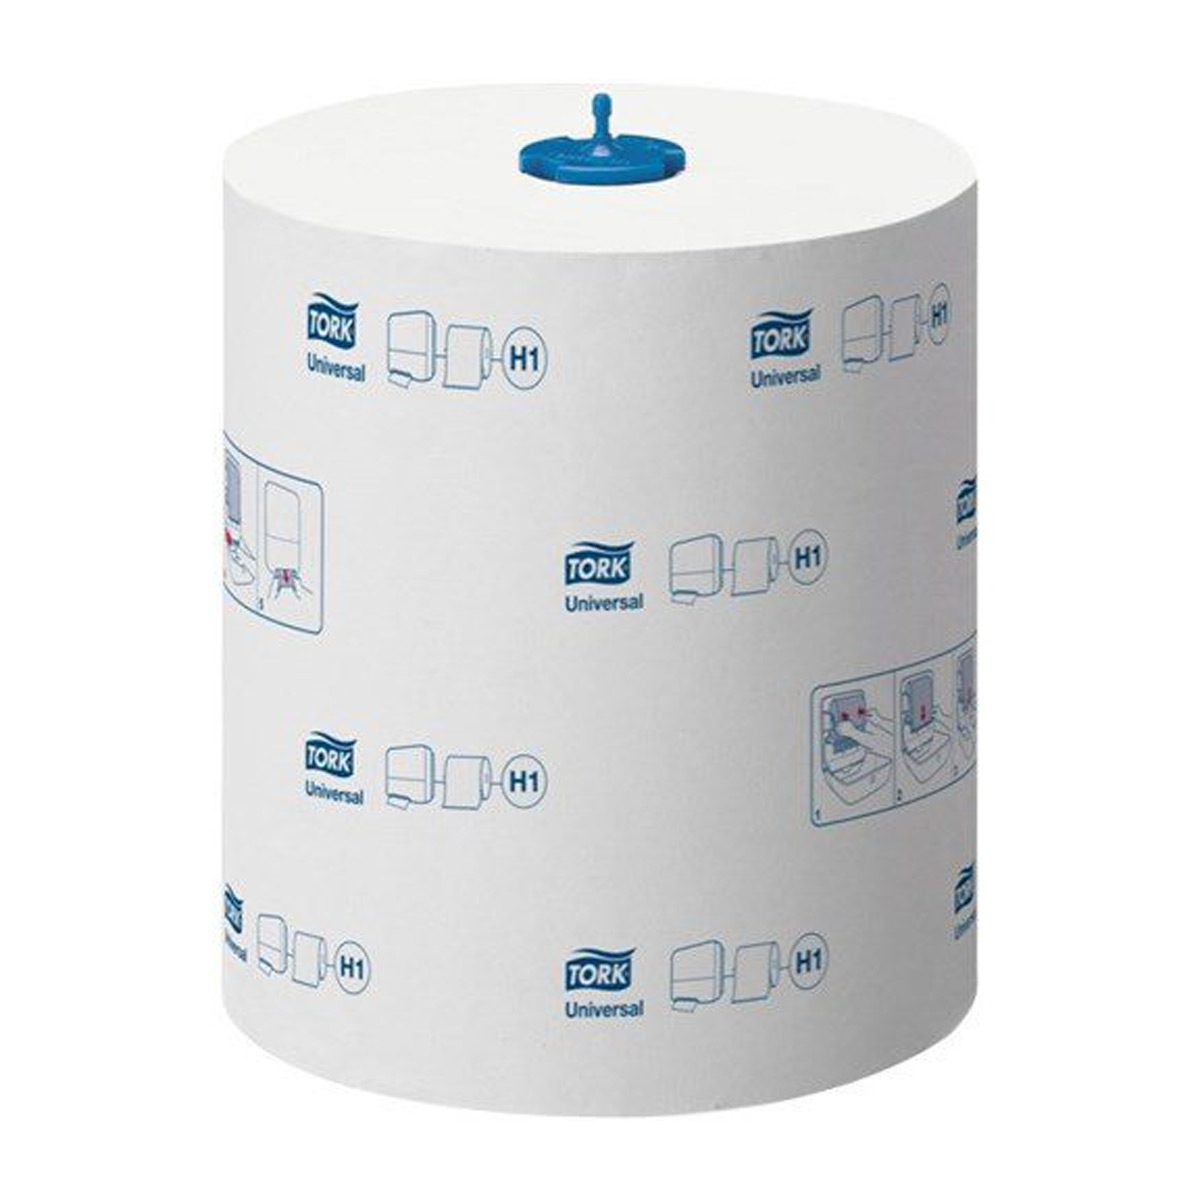 paper-products-paper-towels-tork-matic-extra-long-hand-towel-roll-h1-1ply-1142-sheets-6-rolls-extra-long-hand-towel-roll-schools-airports-easy-maintenance-washrooms-vjs-distributors-290059